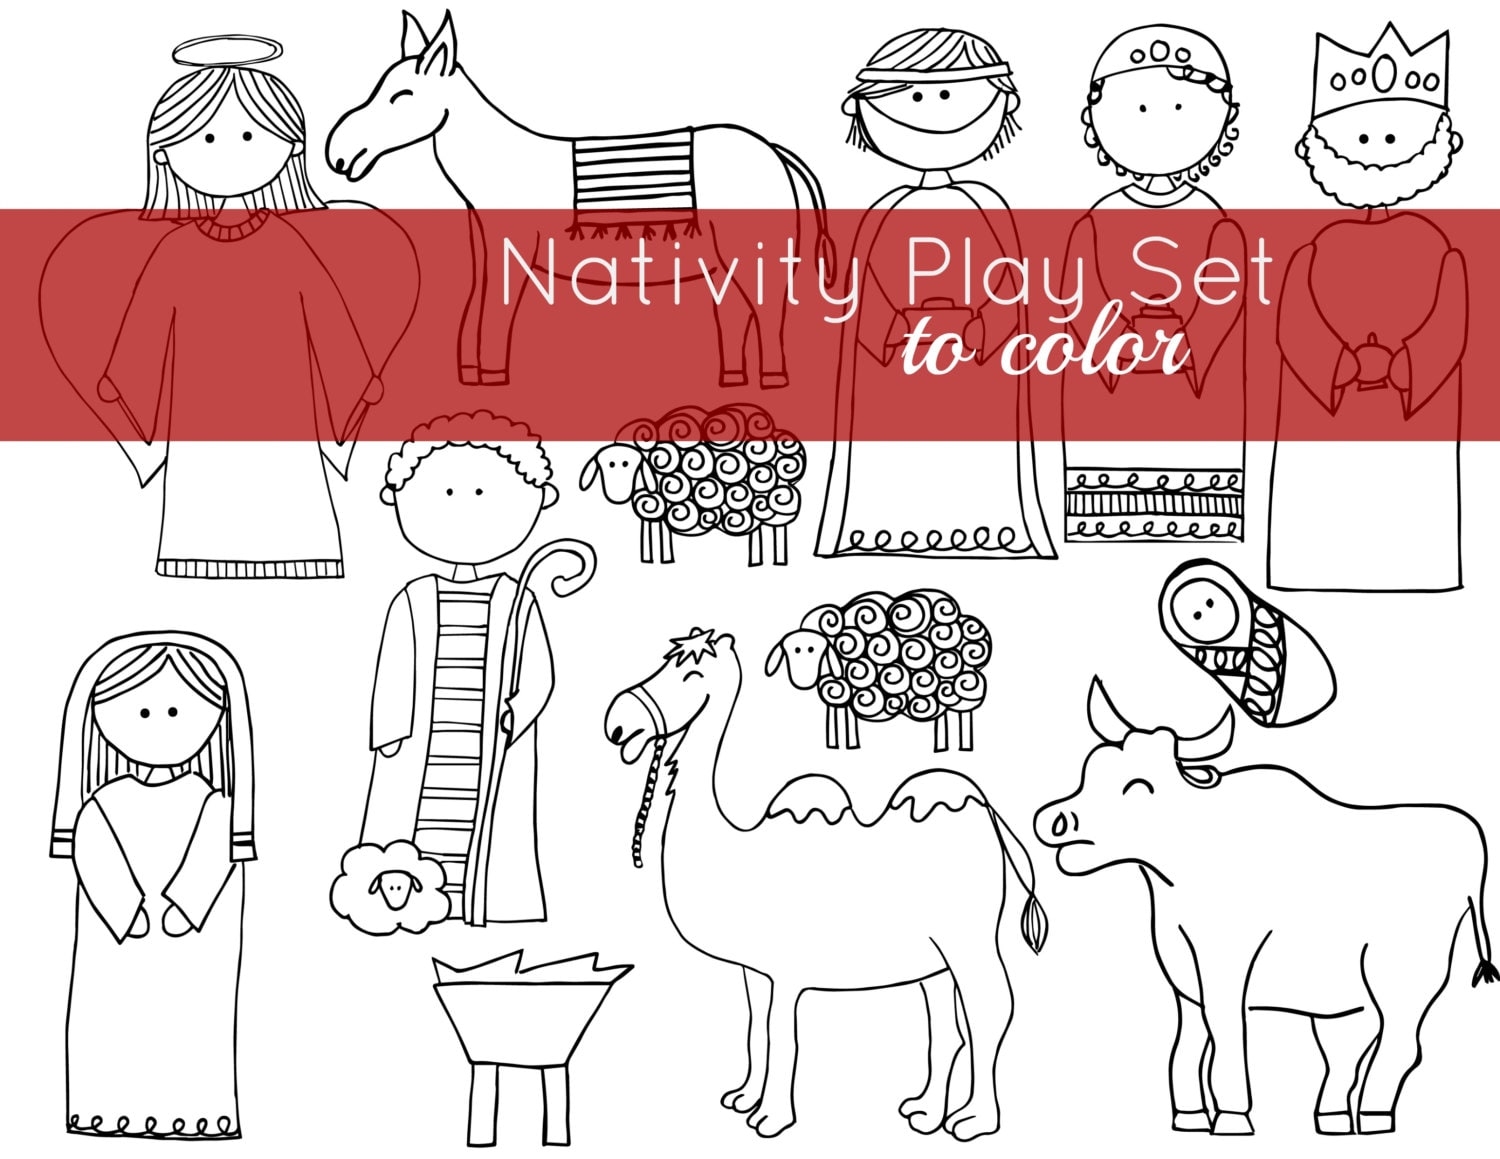 nativity-paper-play-set-coloring-pages-etsy